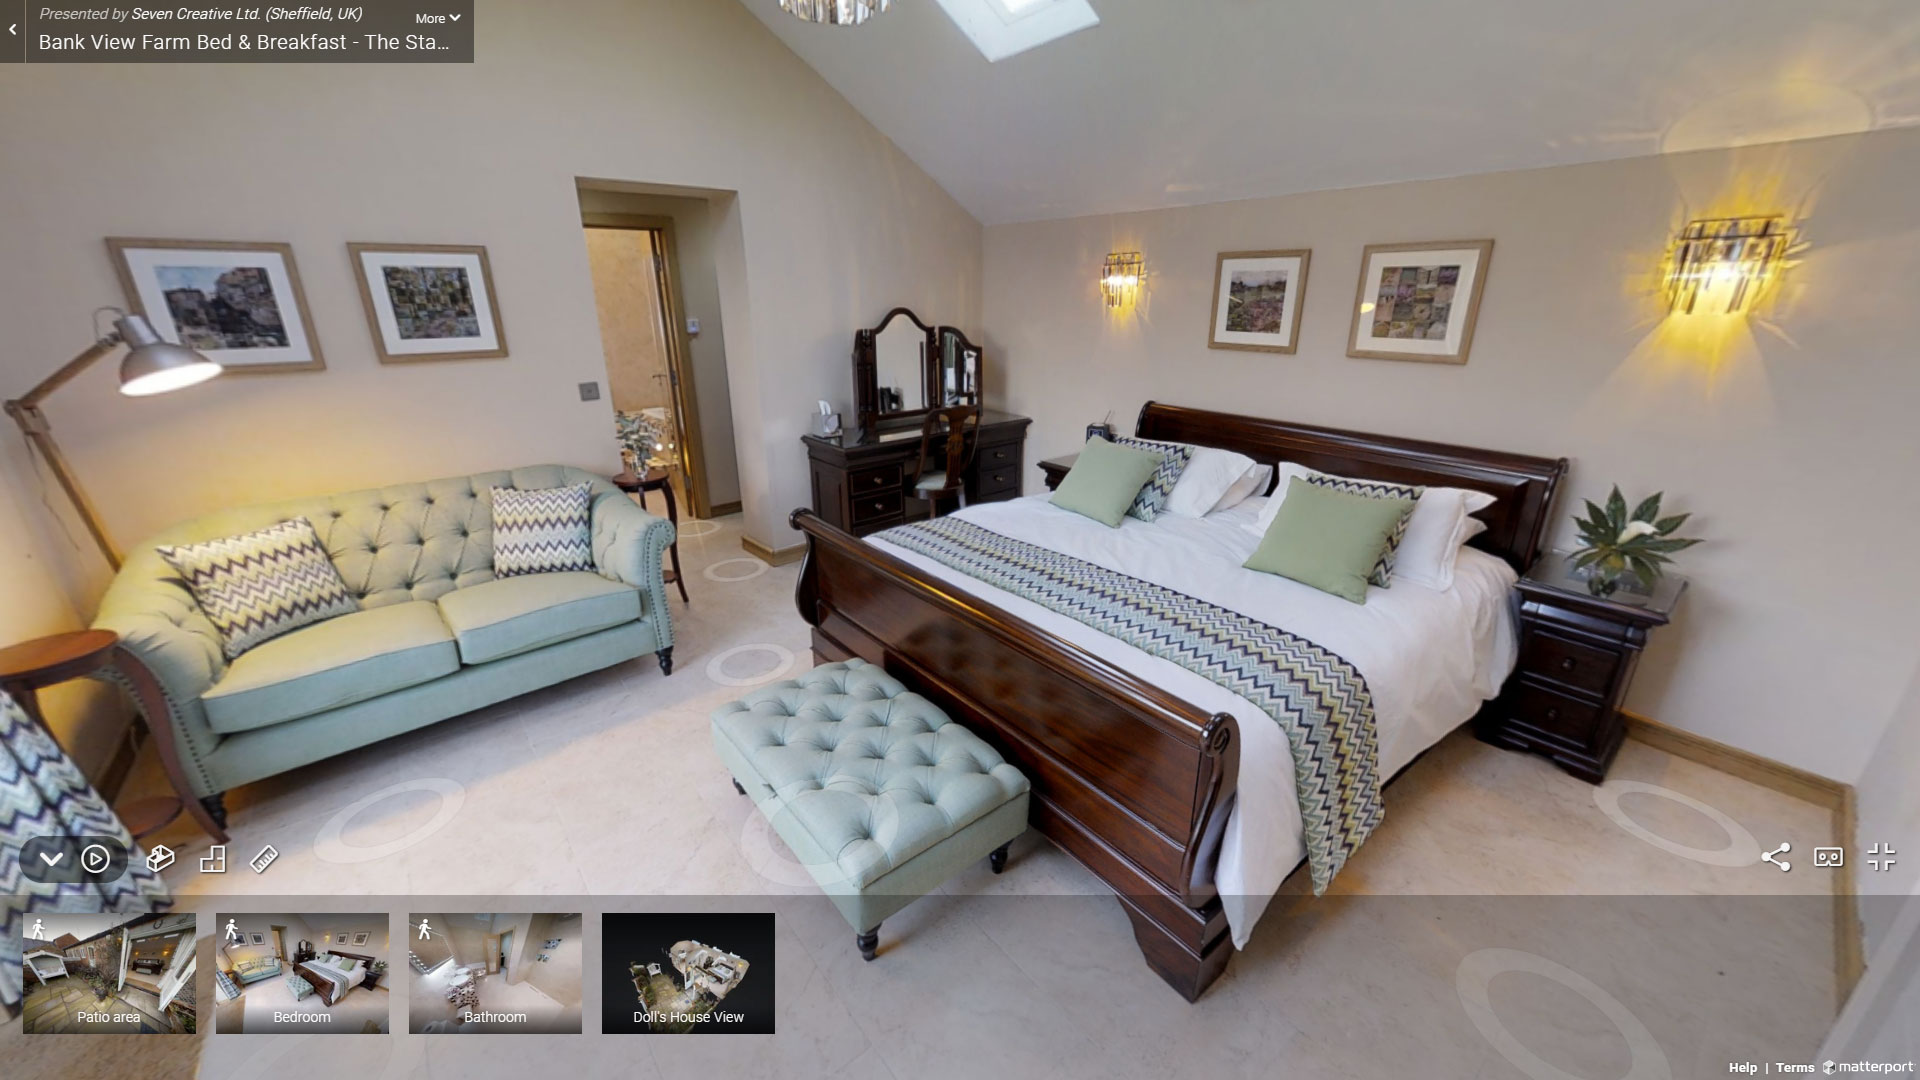 Bed & breakfast virtual tours